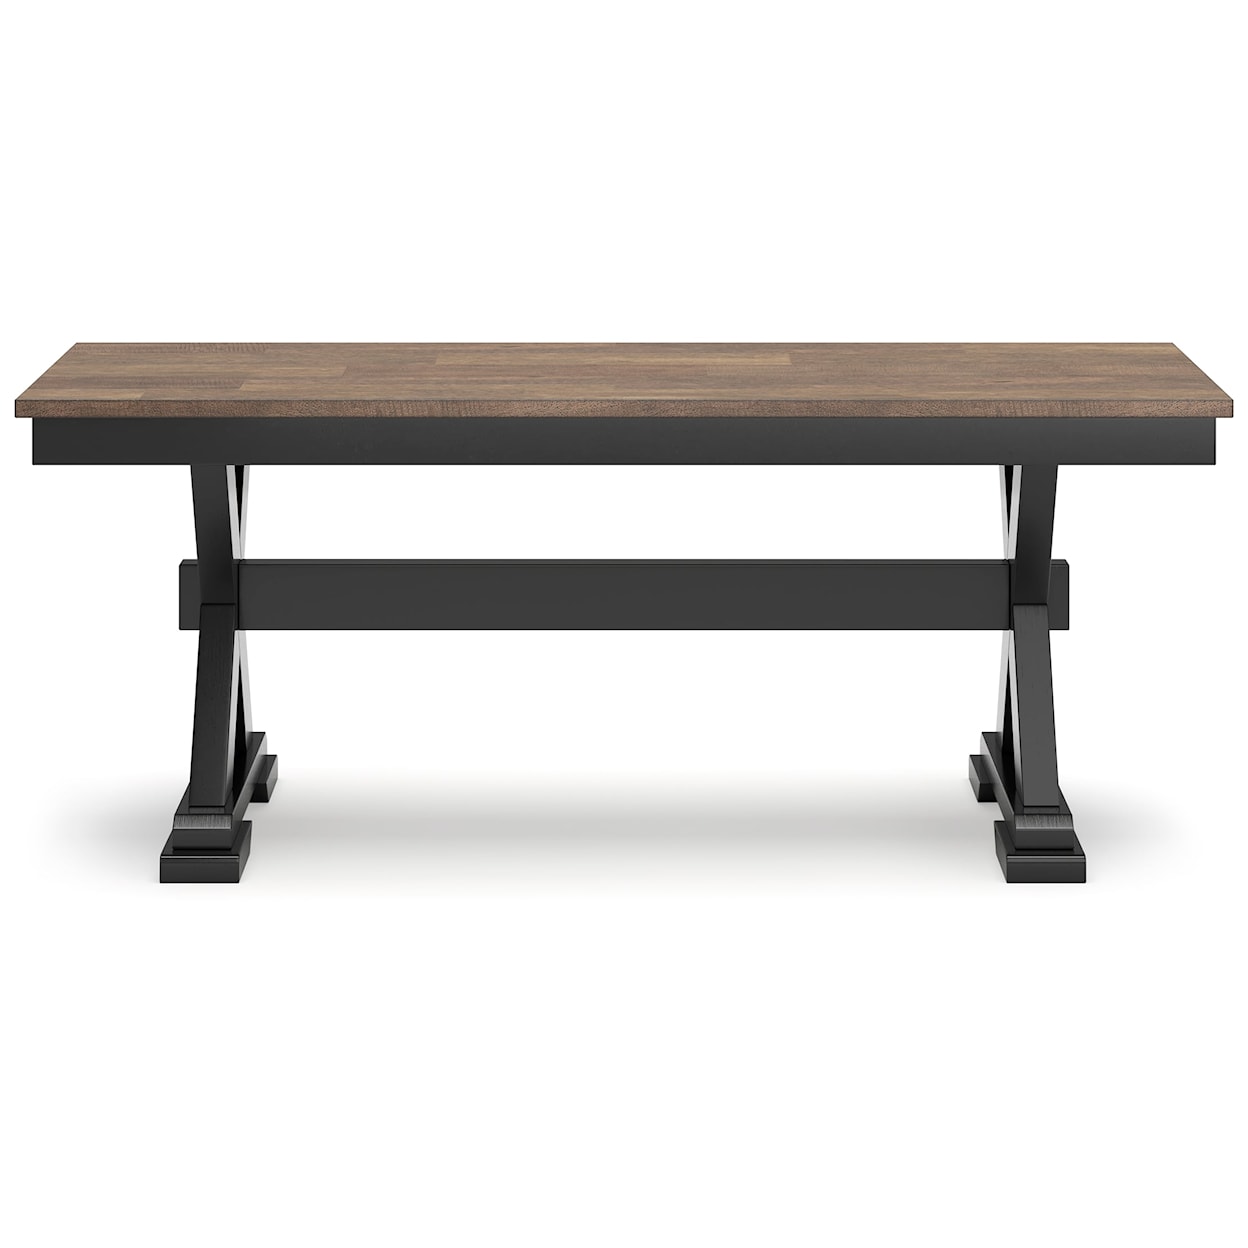 Benchcraft Wildenauer Large Dining Room Bench